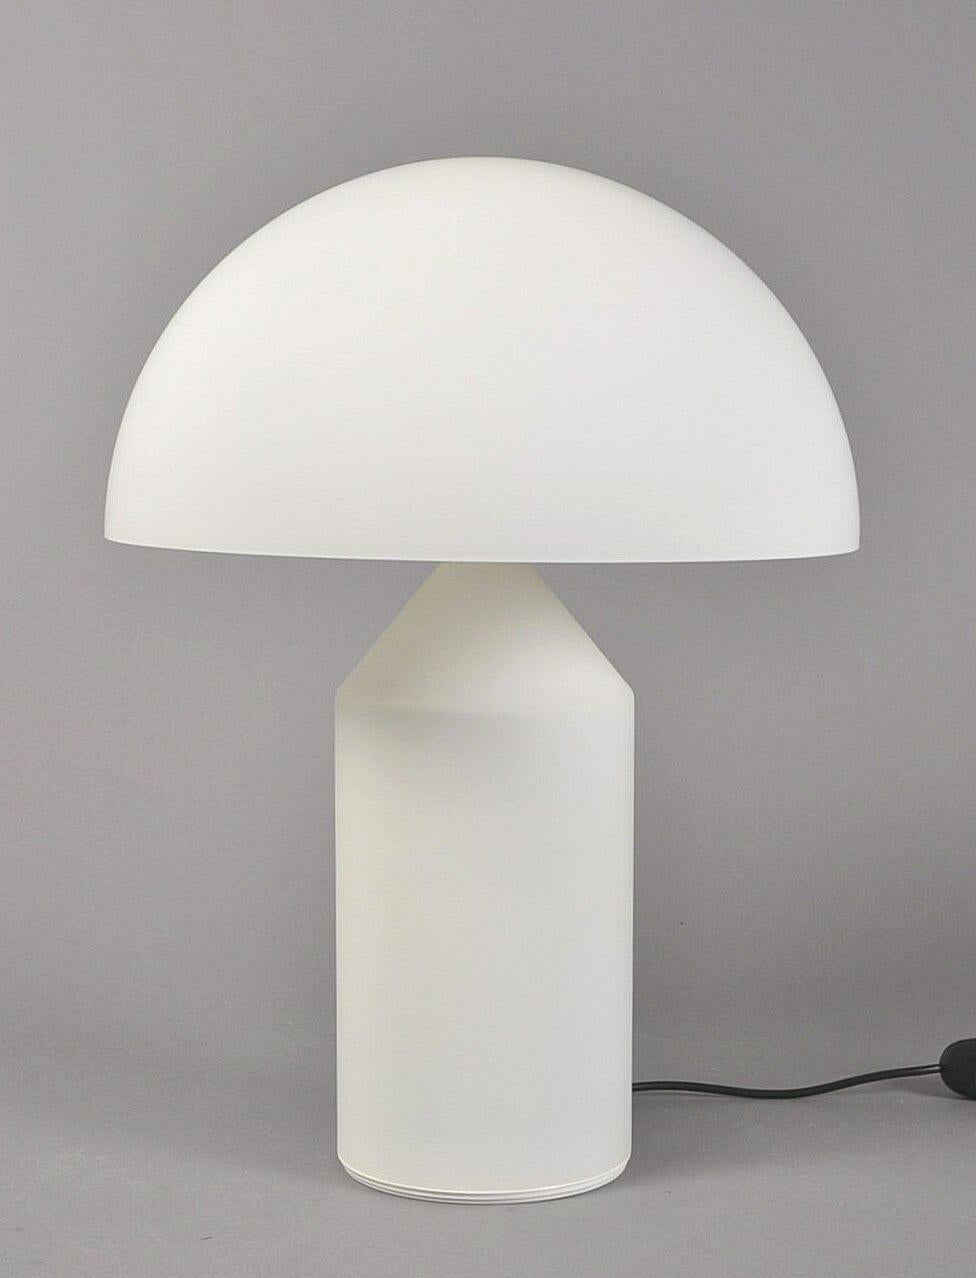 The Atollo table lamp (1977) is distinguished by its minimal geometric construction. The worldwide imitated and yet inimitable lamp won numerous awards, and it can also be found as a permanent exhibit in many museums around the world. The series